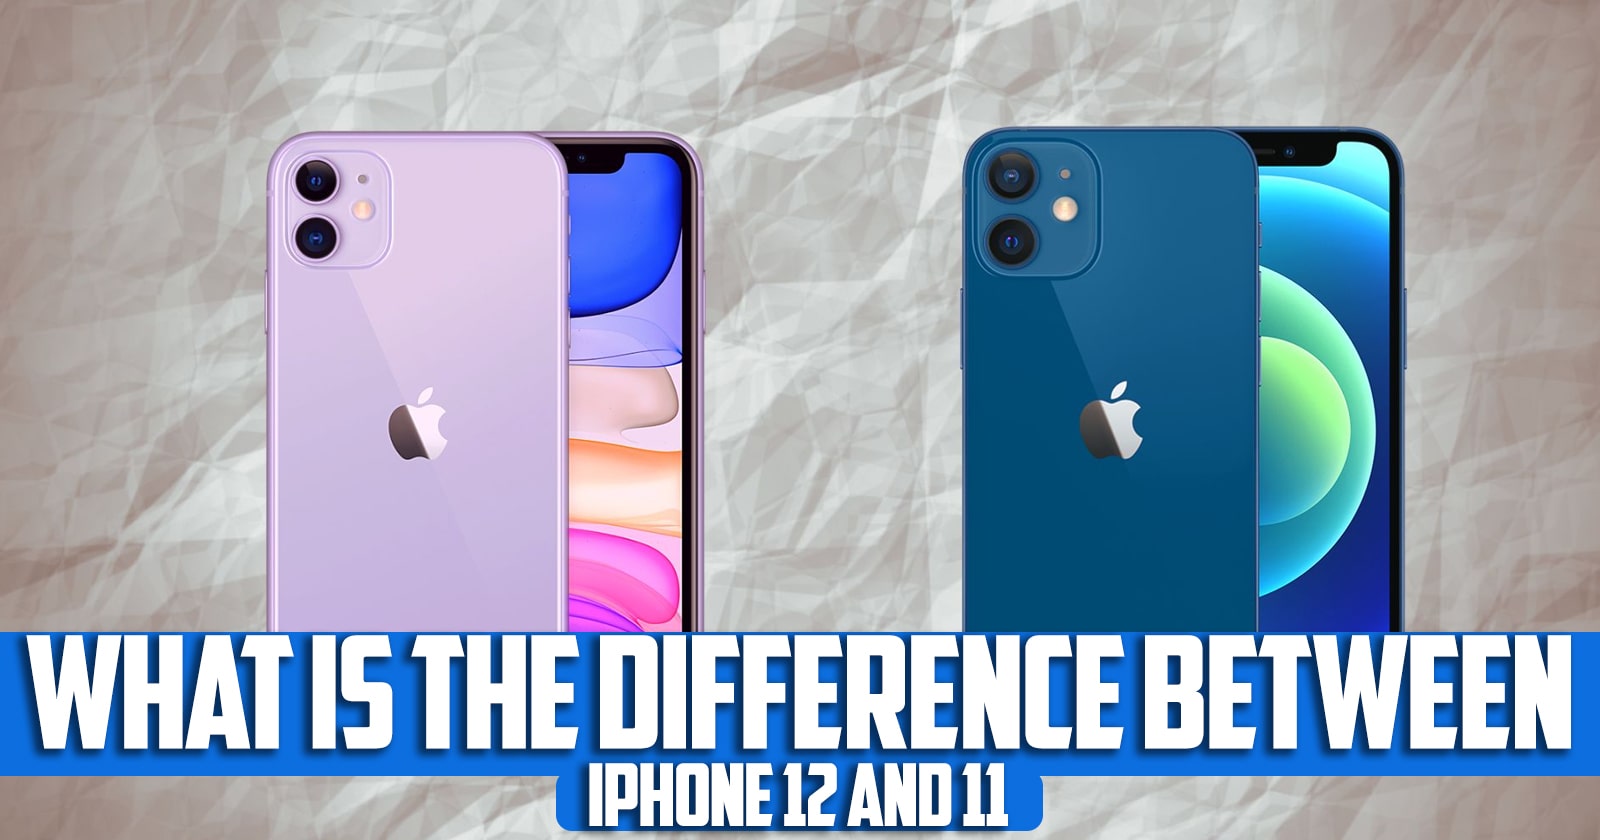 What is the difference between iPhone 11 and iPhone 12?